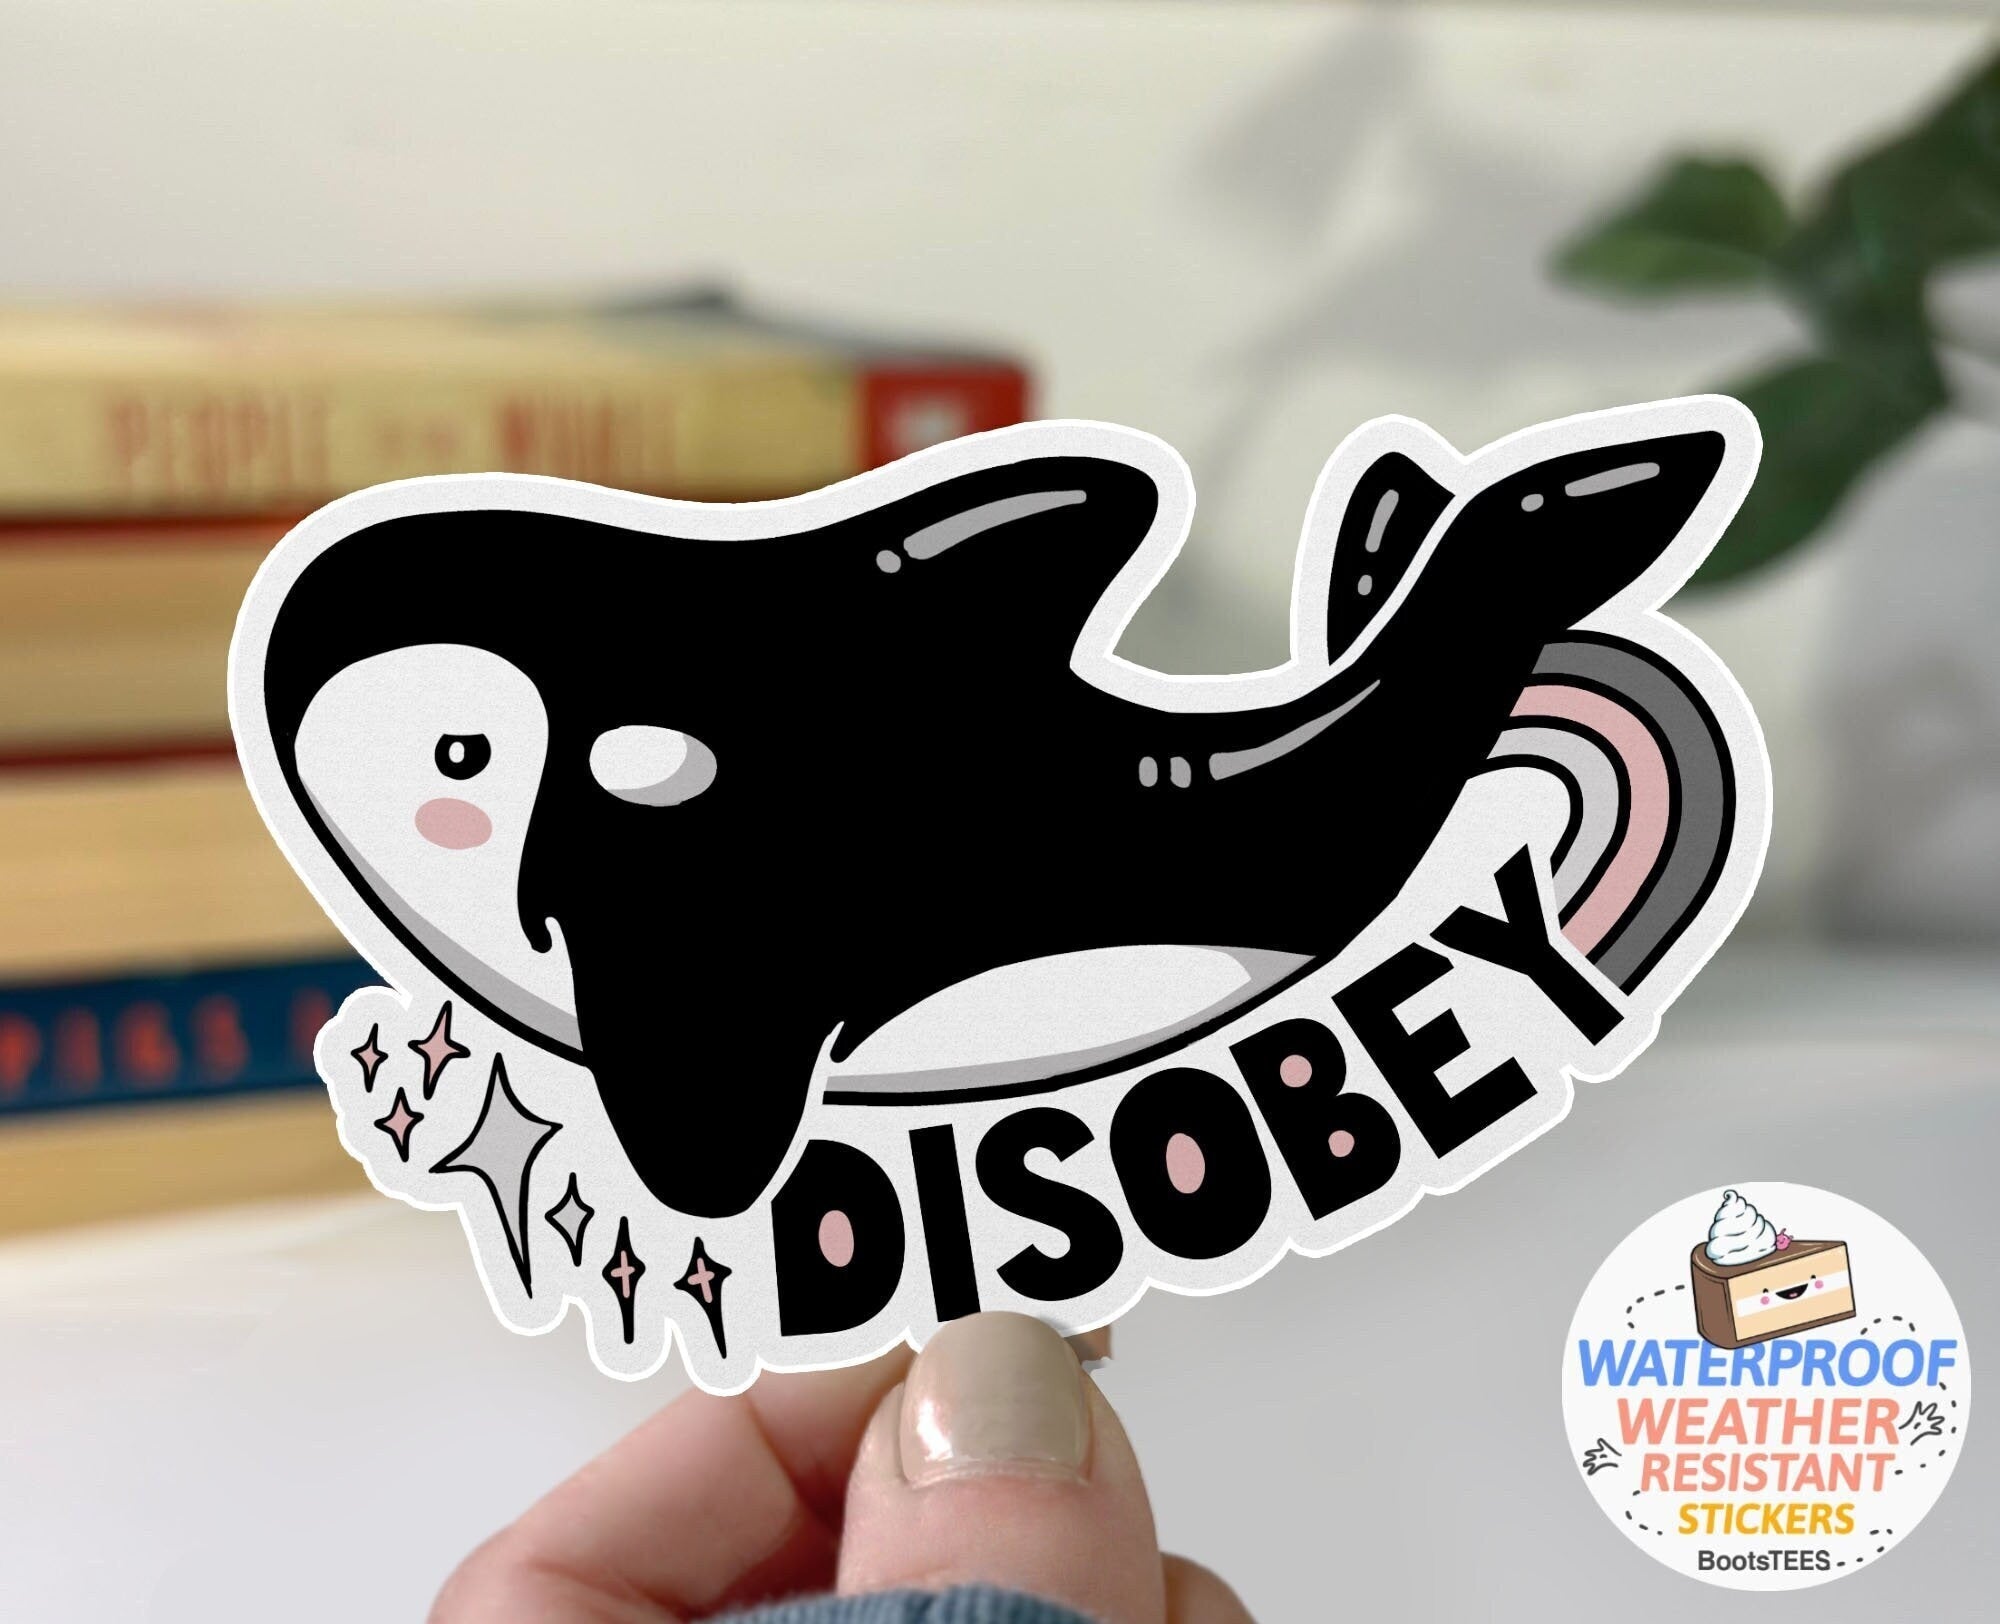 Disobey Orca Sticker, 1 Sticker by BootsTees